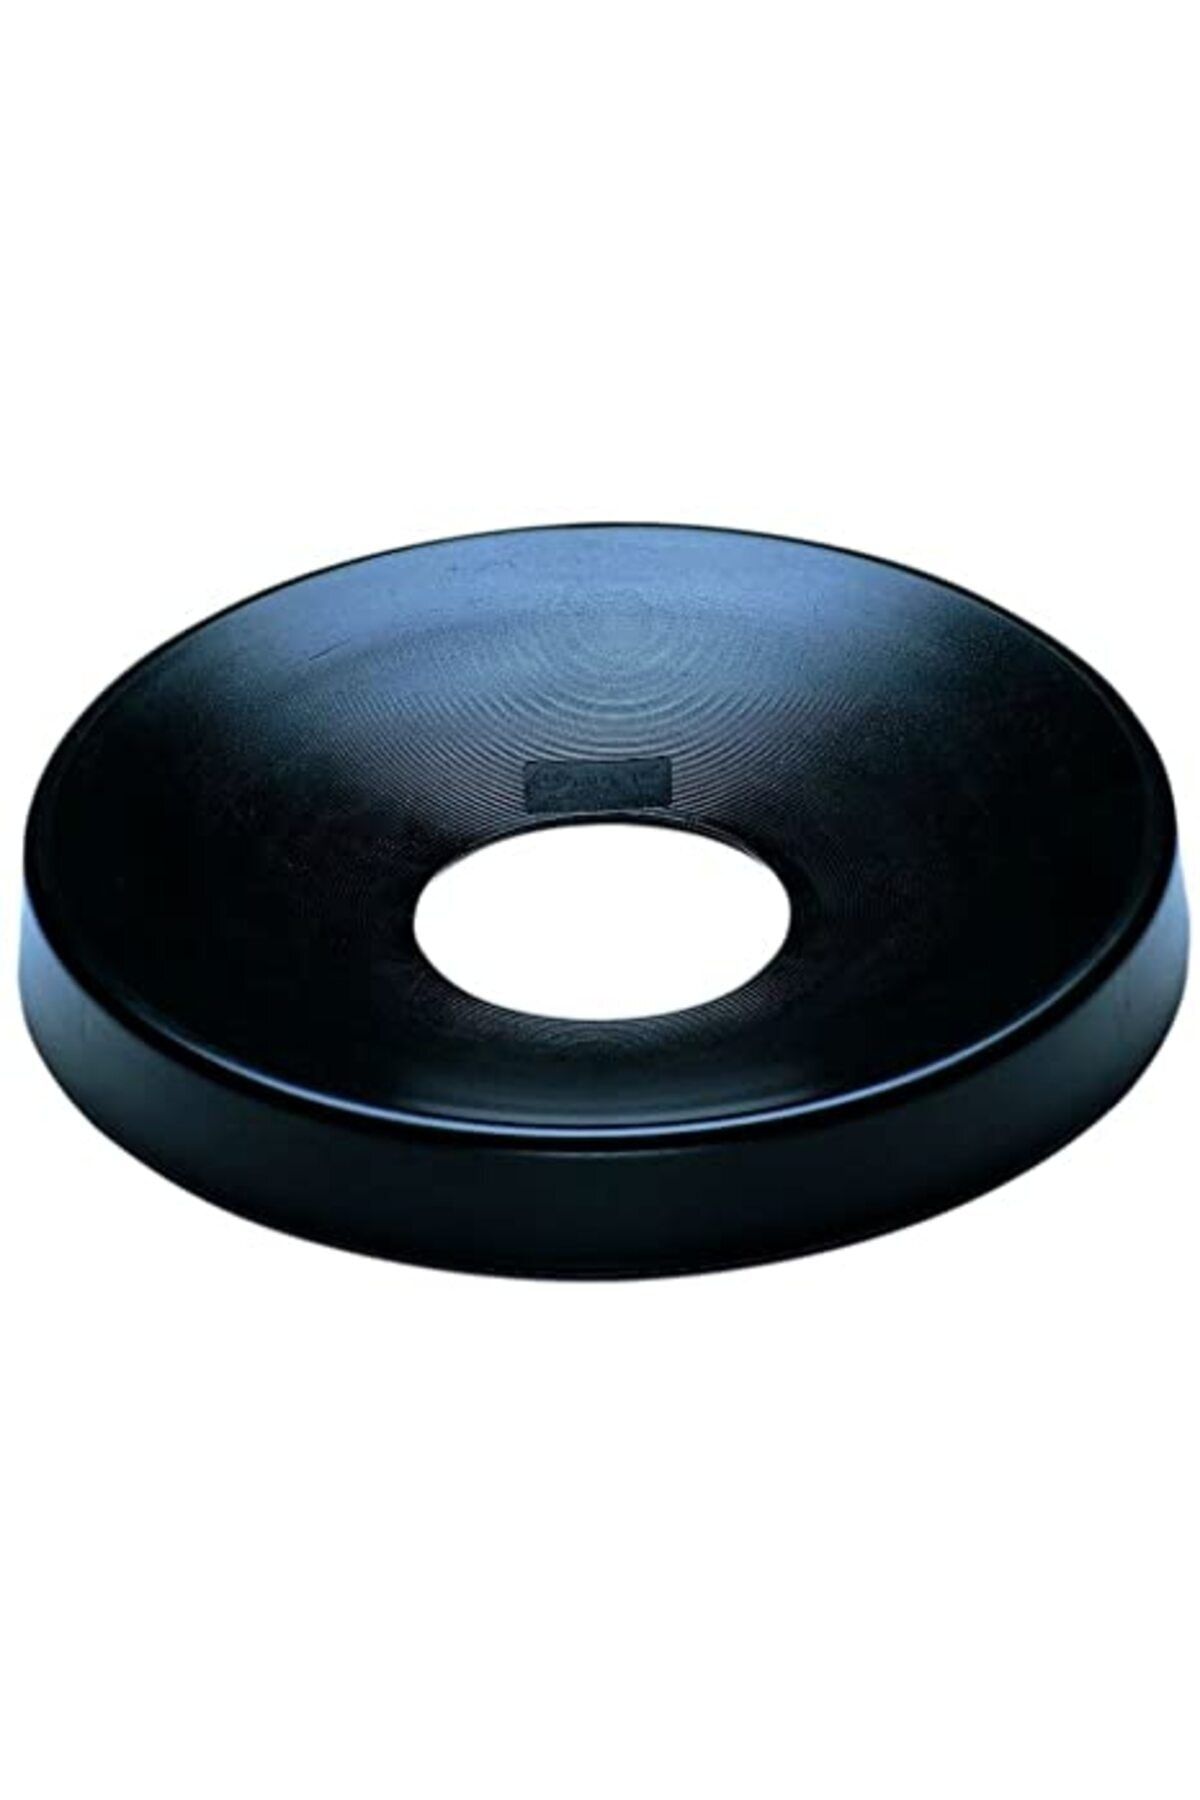 Theraband OBS THERABAND BALL DISH